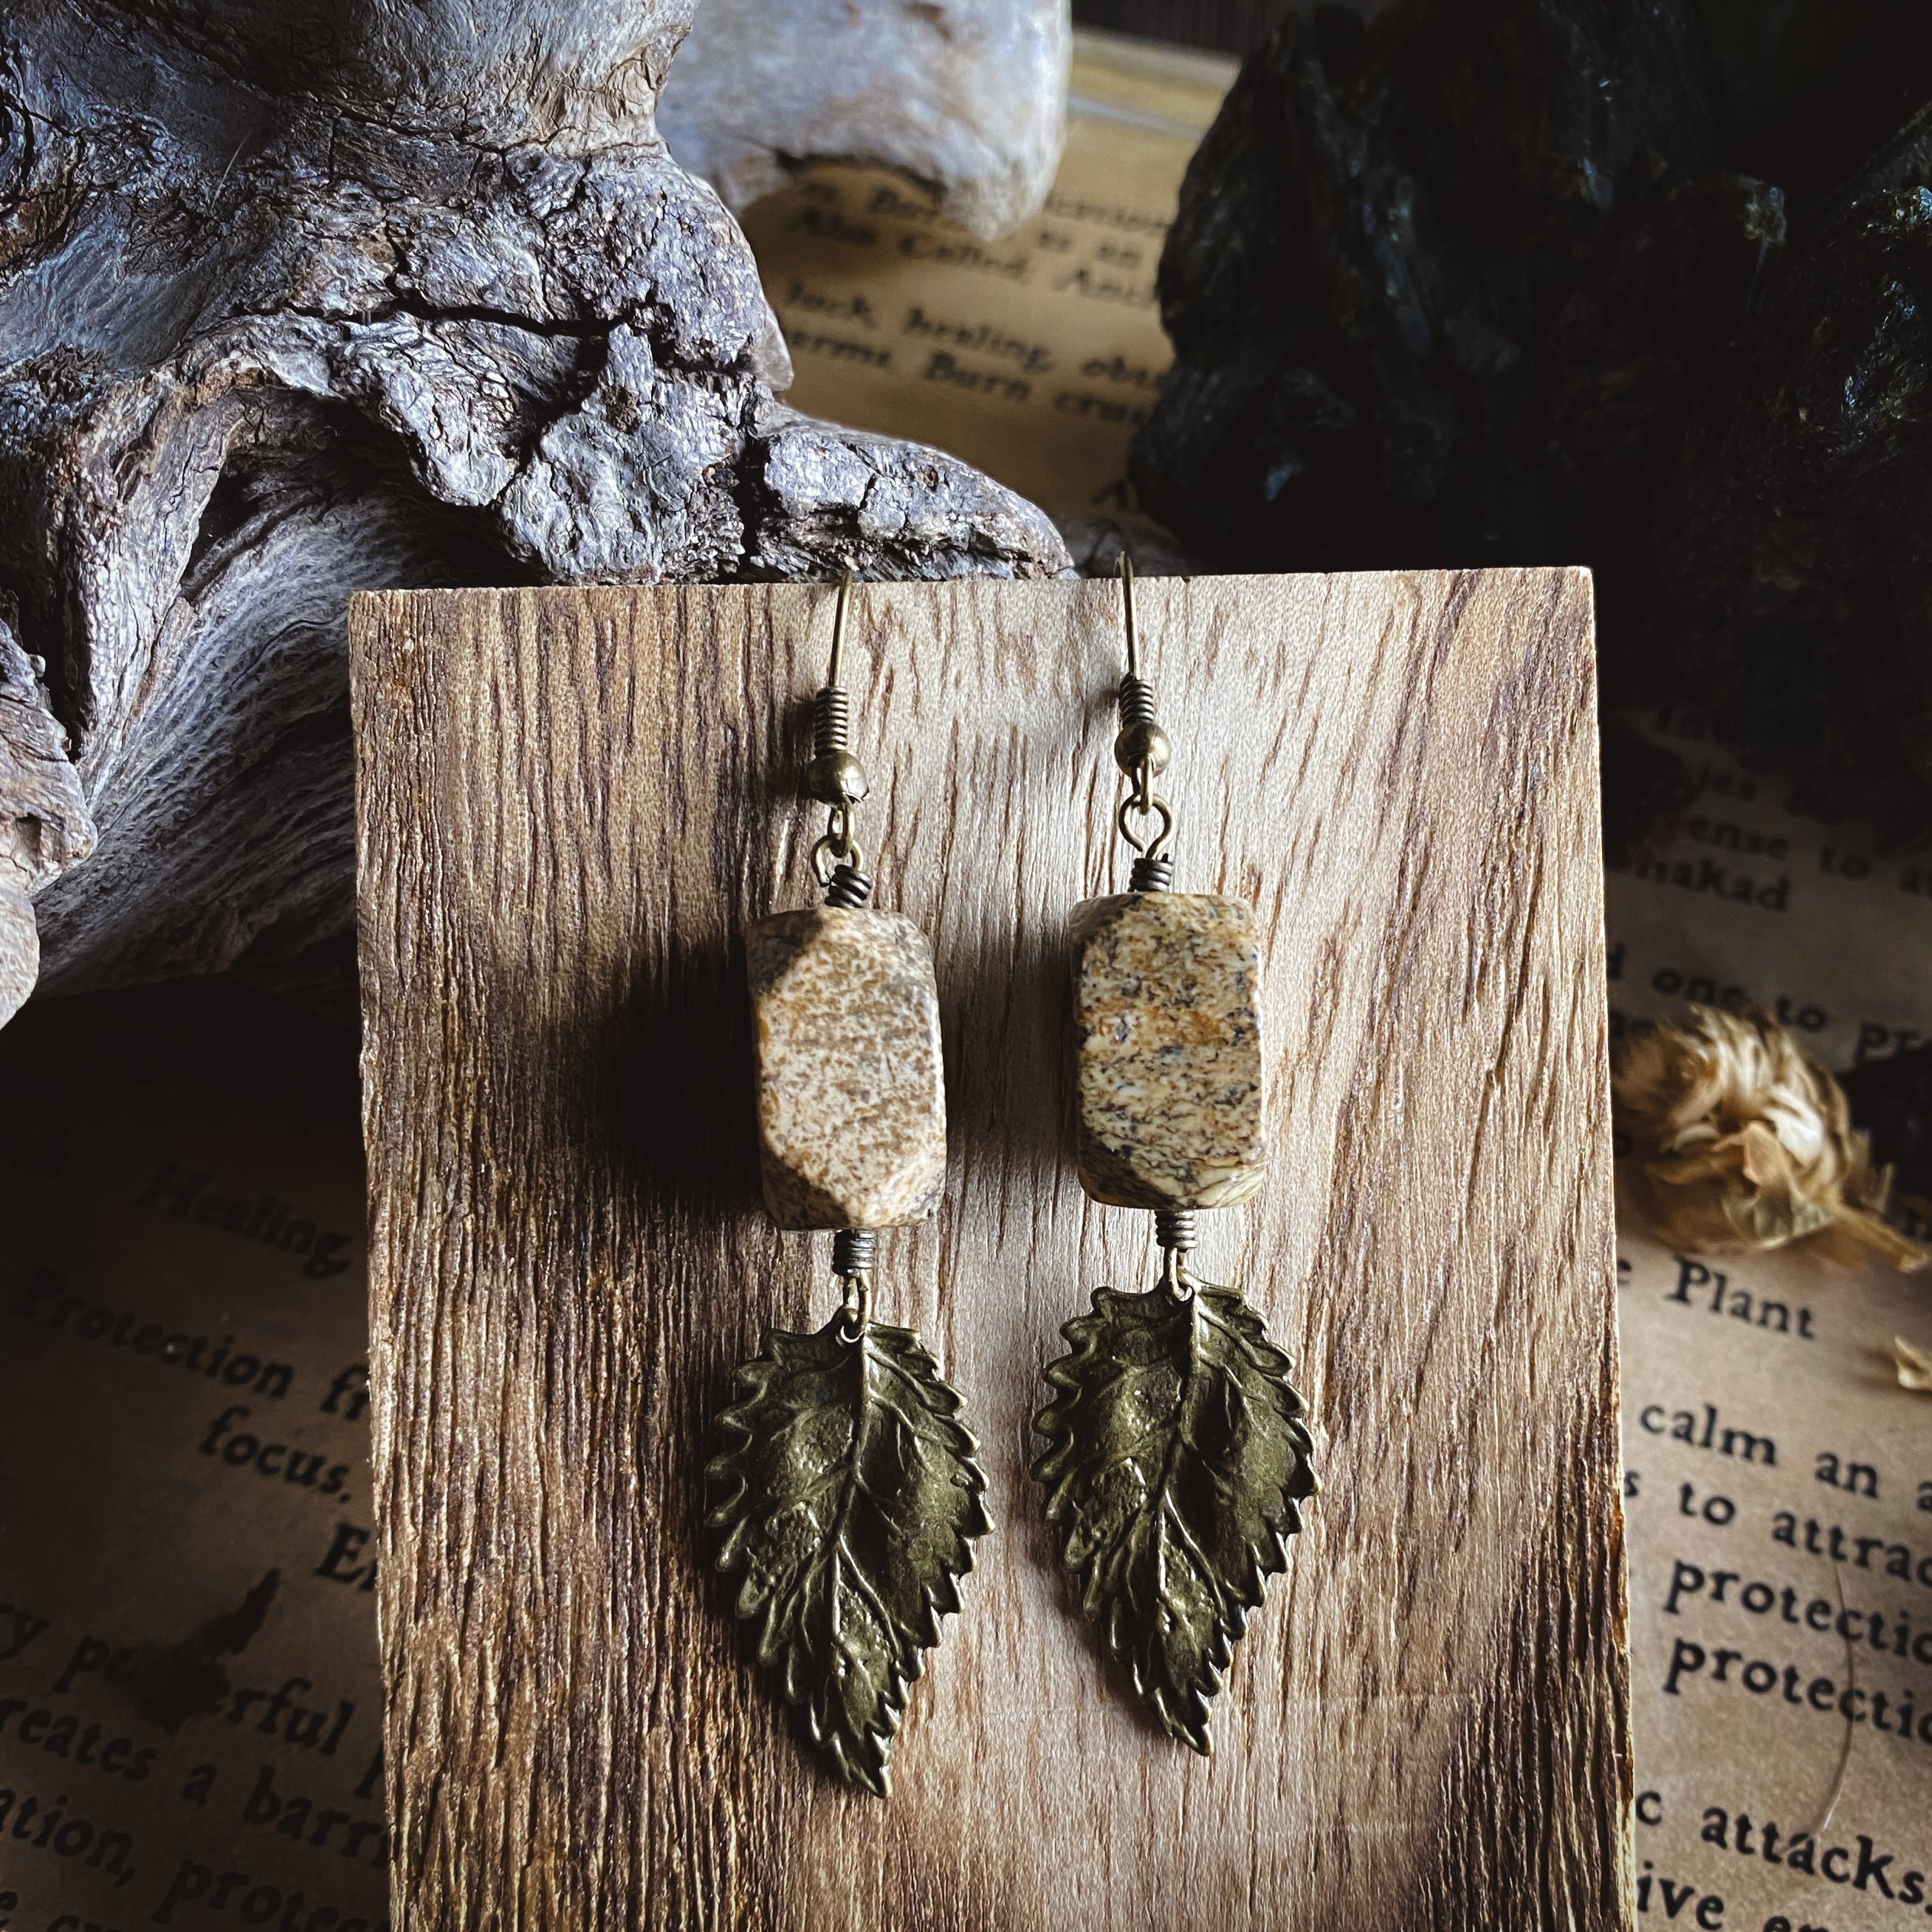 Of the Earth - Hand Crafted Earrings